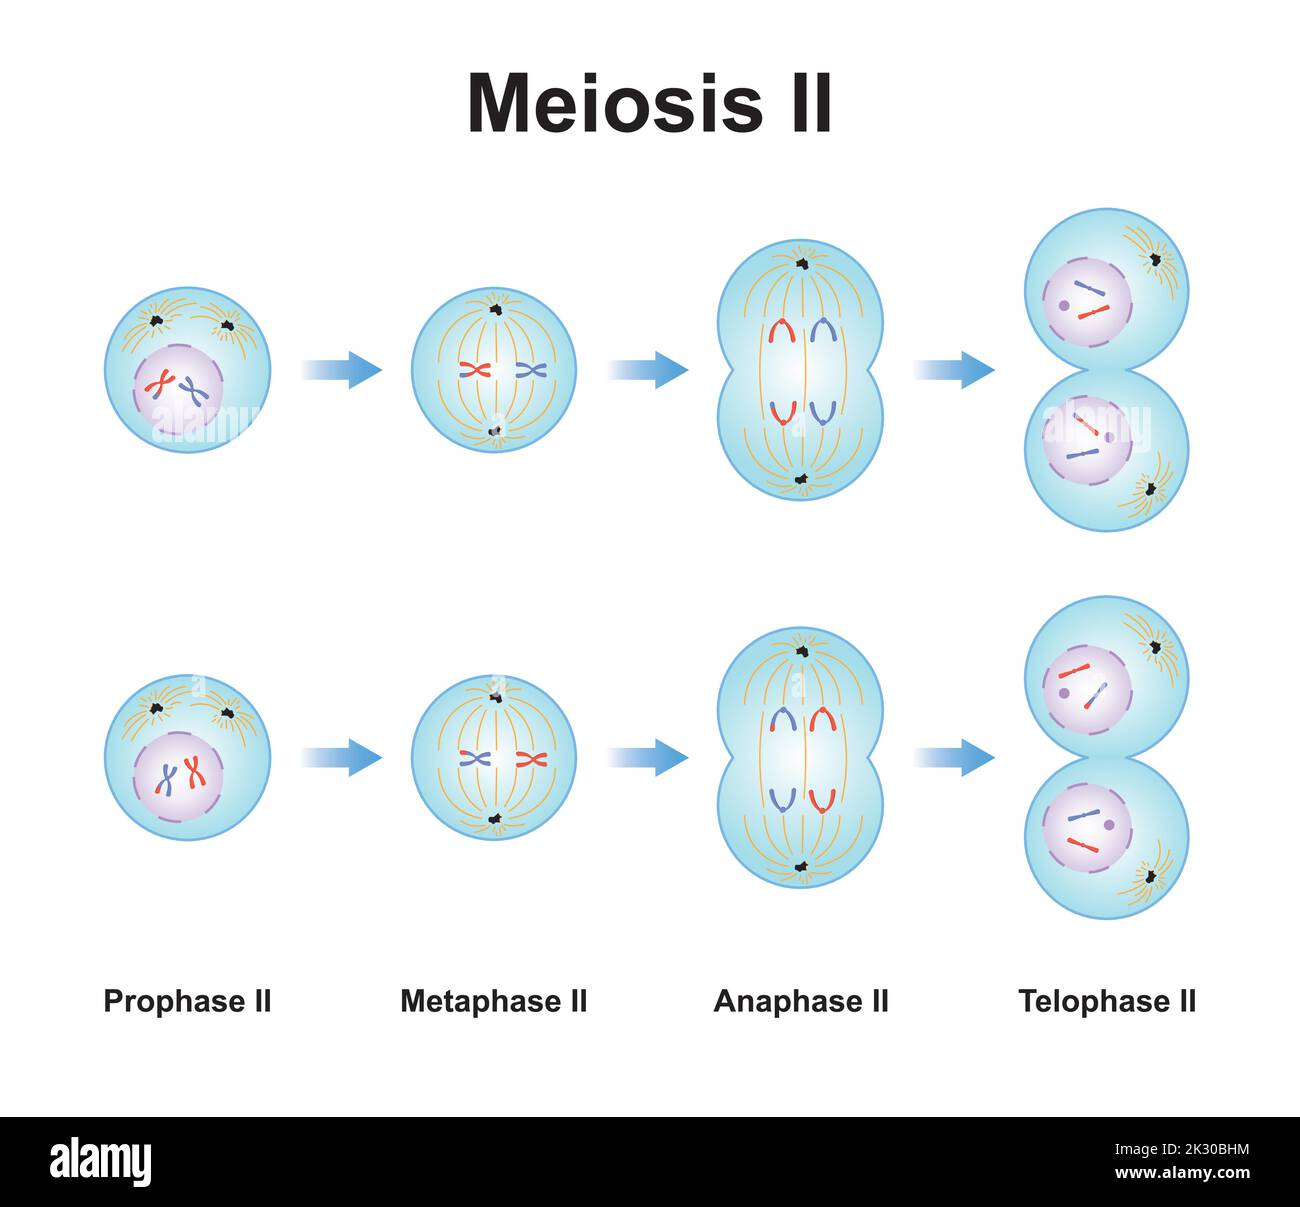 Scientific Designing of Meiosis 2. The Second Stage of Meiosis Process. Colorful Symbols. Vector Illustration. Stock Vector